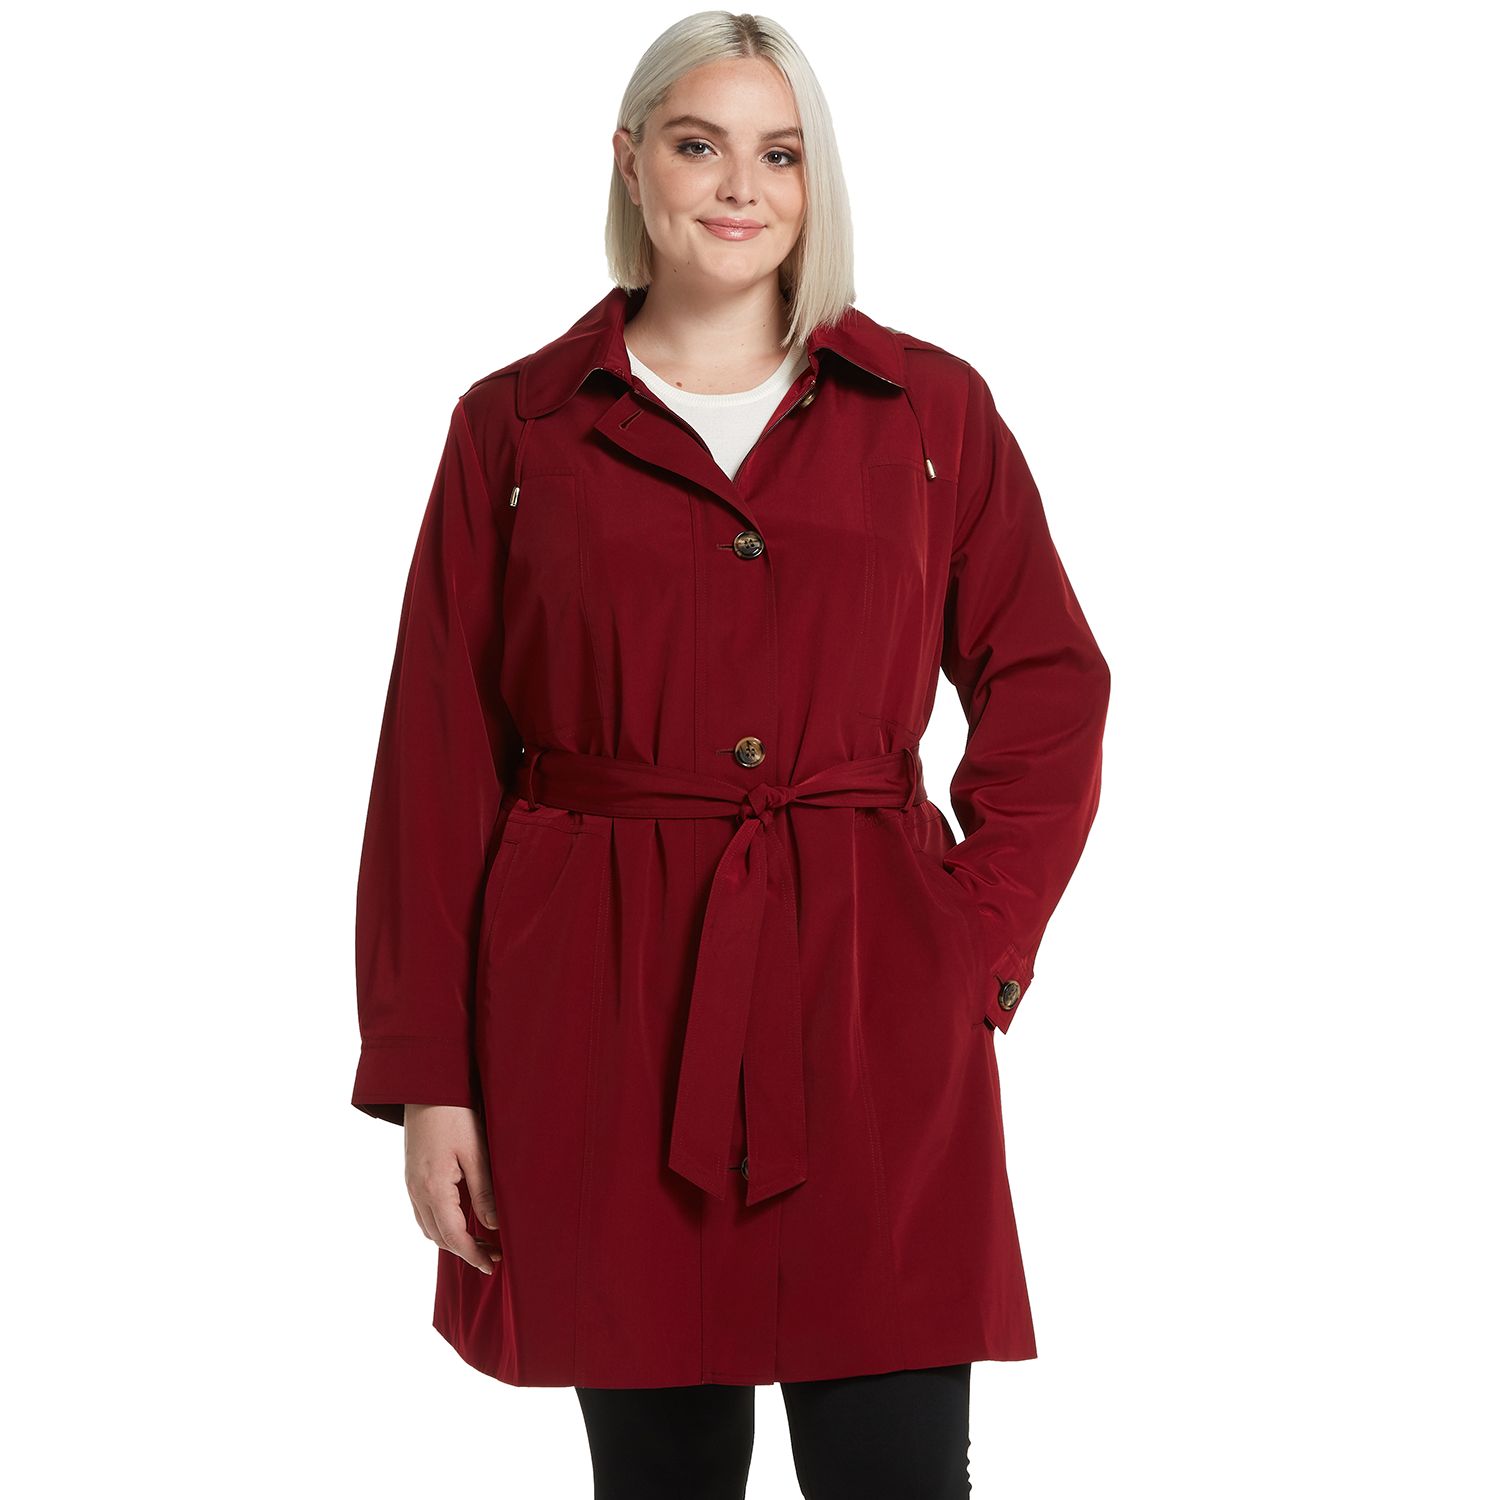 women's plus size red trench coat